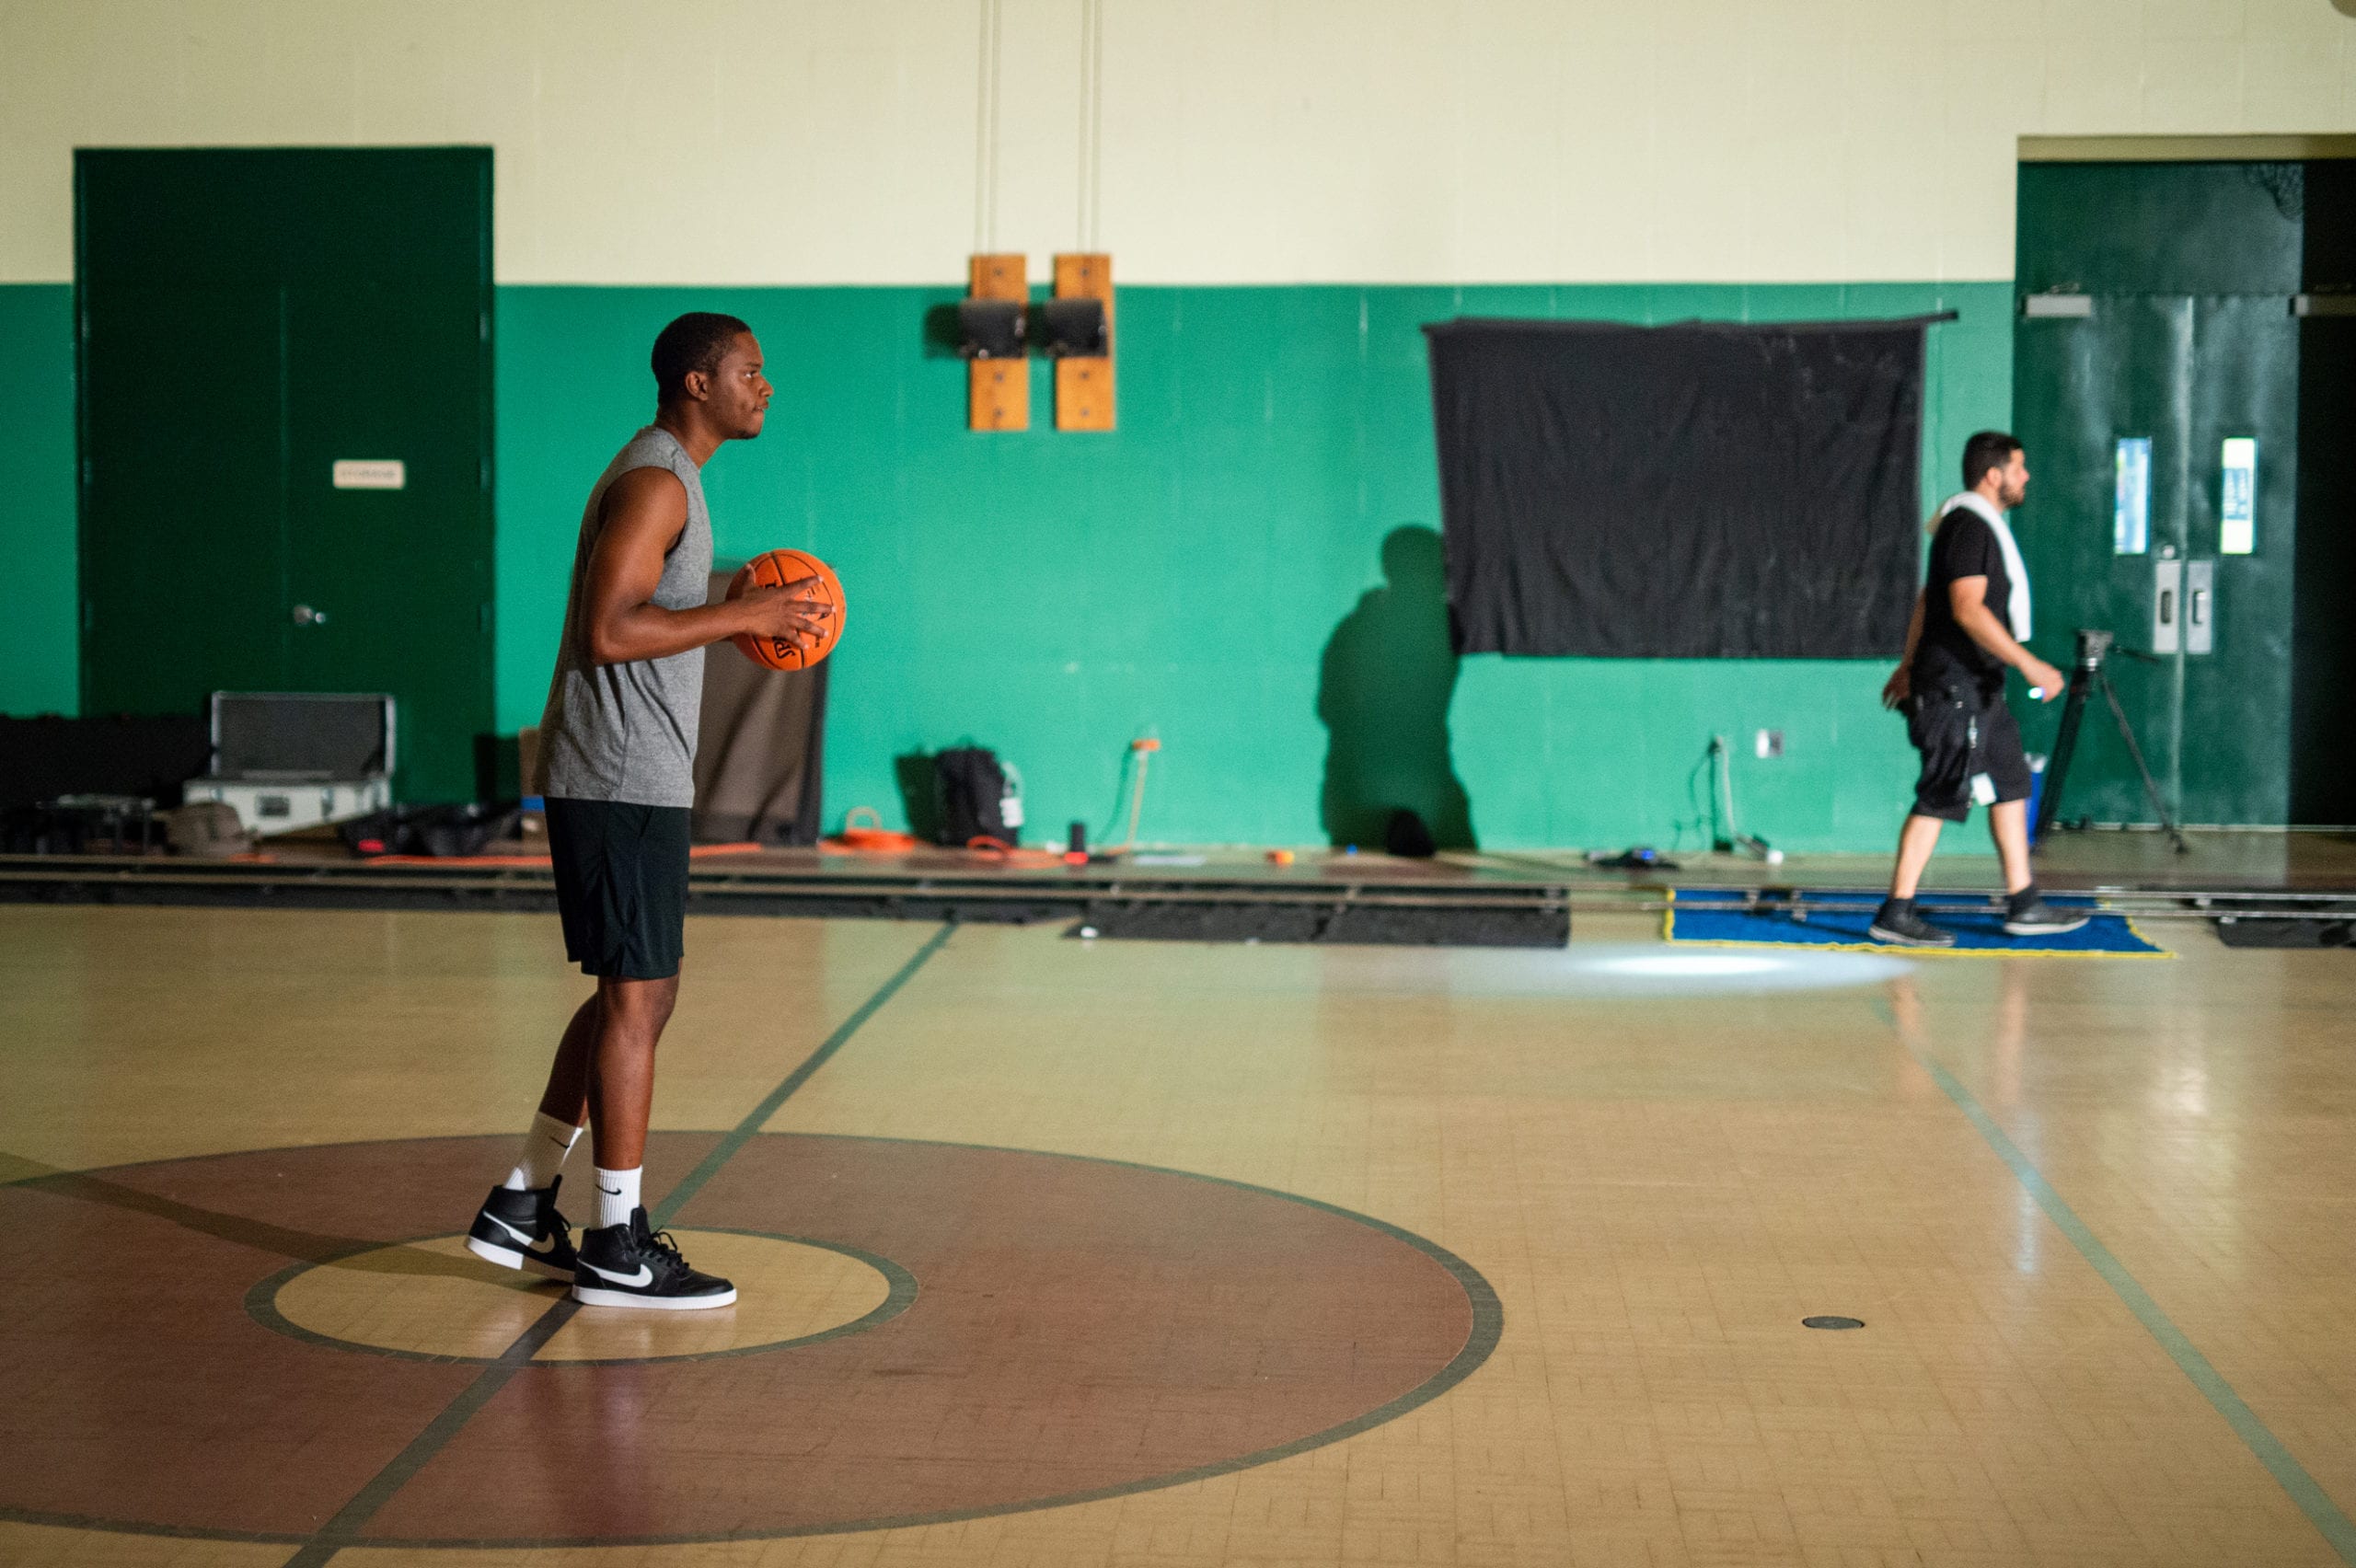 Nike African American man wearing a gray t shirt holding a ball on a basketball court posing for the camera with a crew member walking off screen in the background